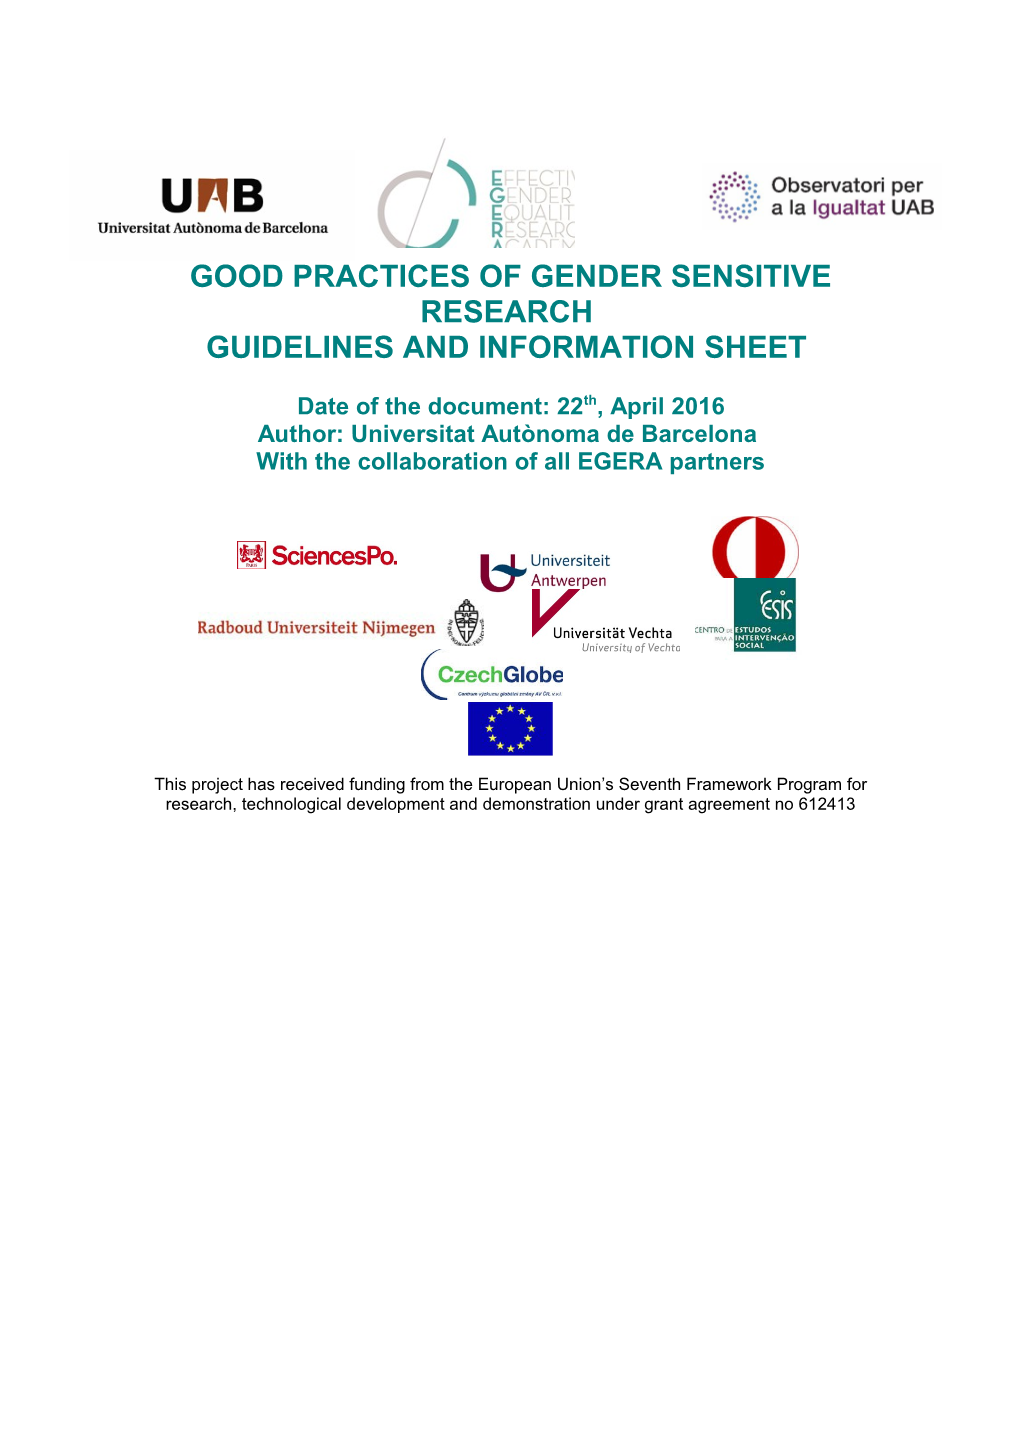 Good Practices of Gender Sensitive Research